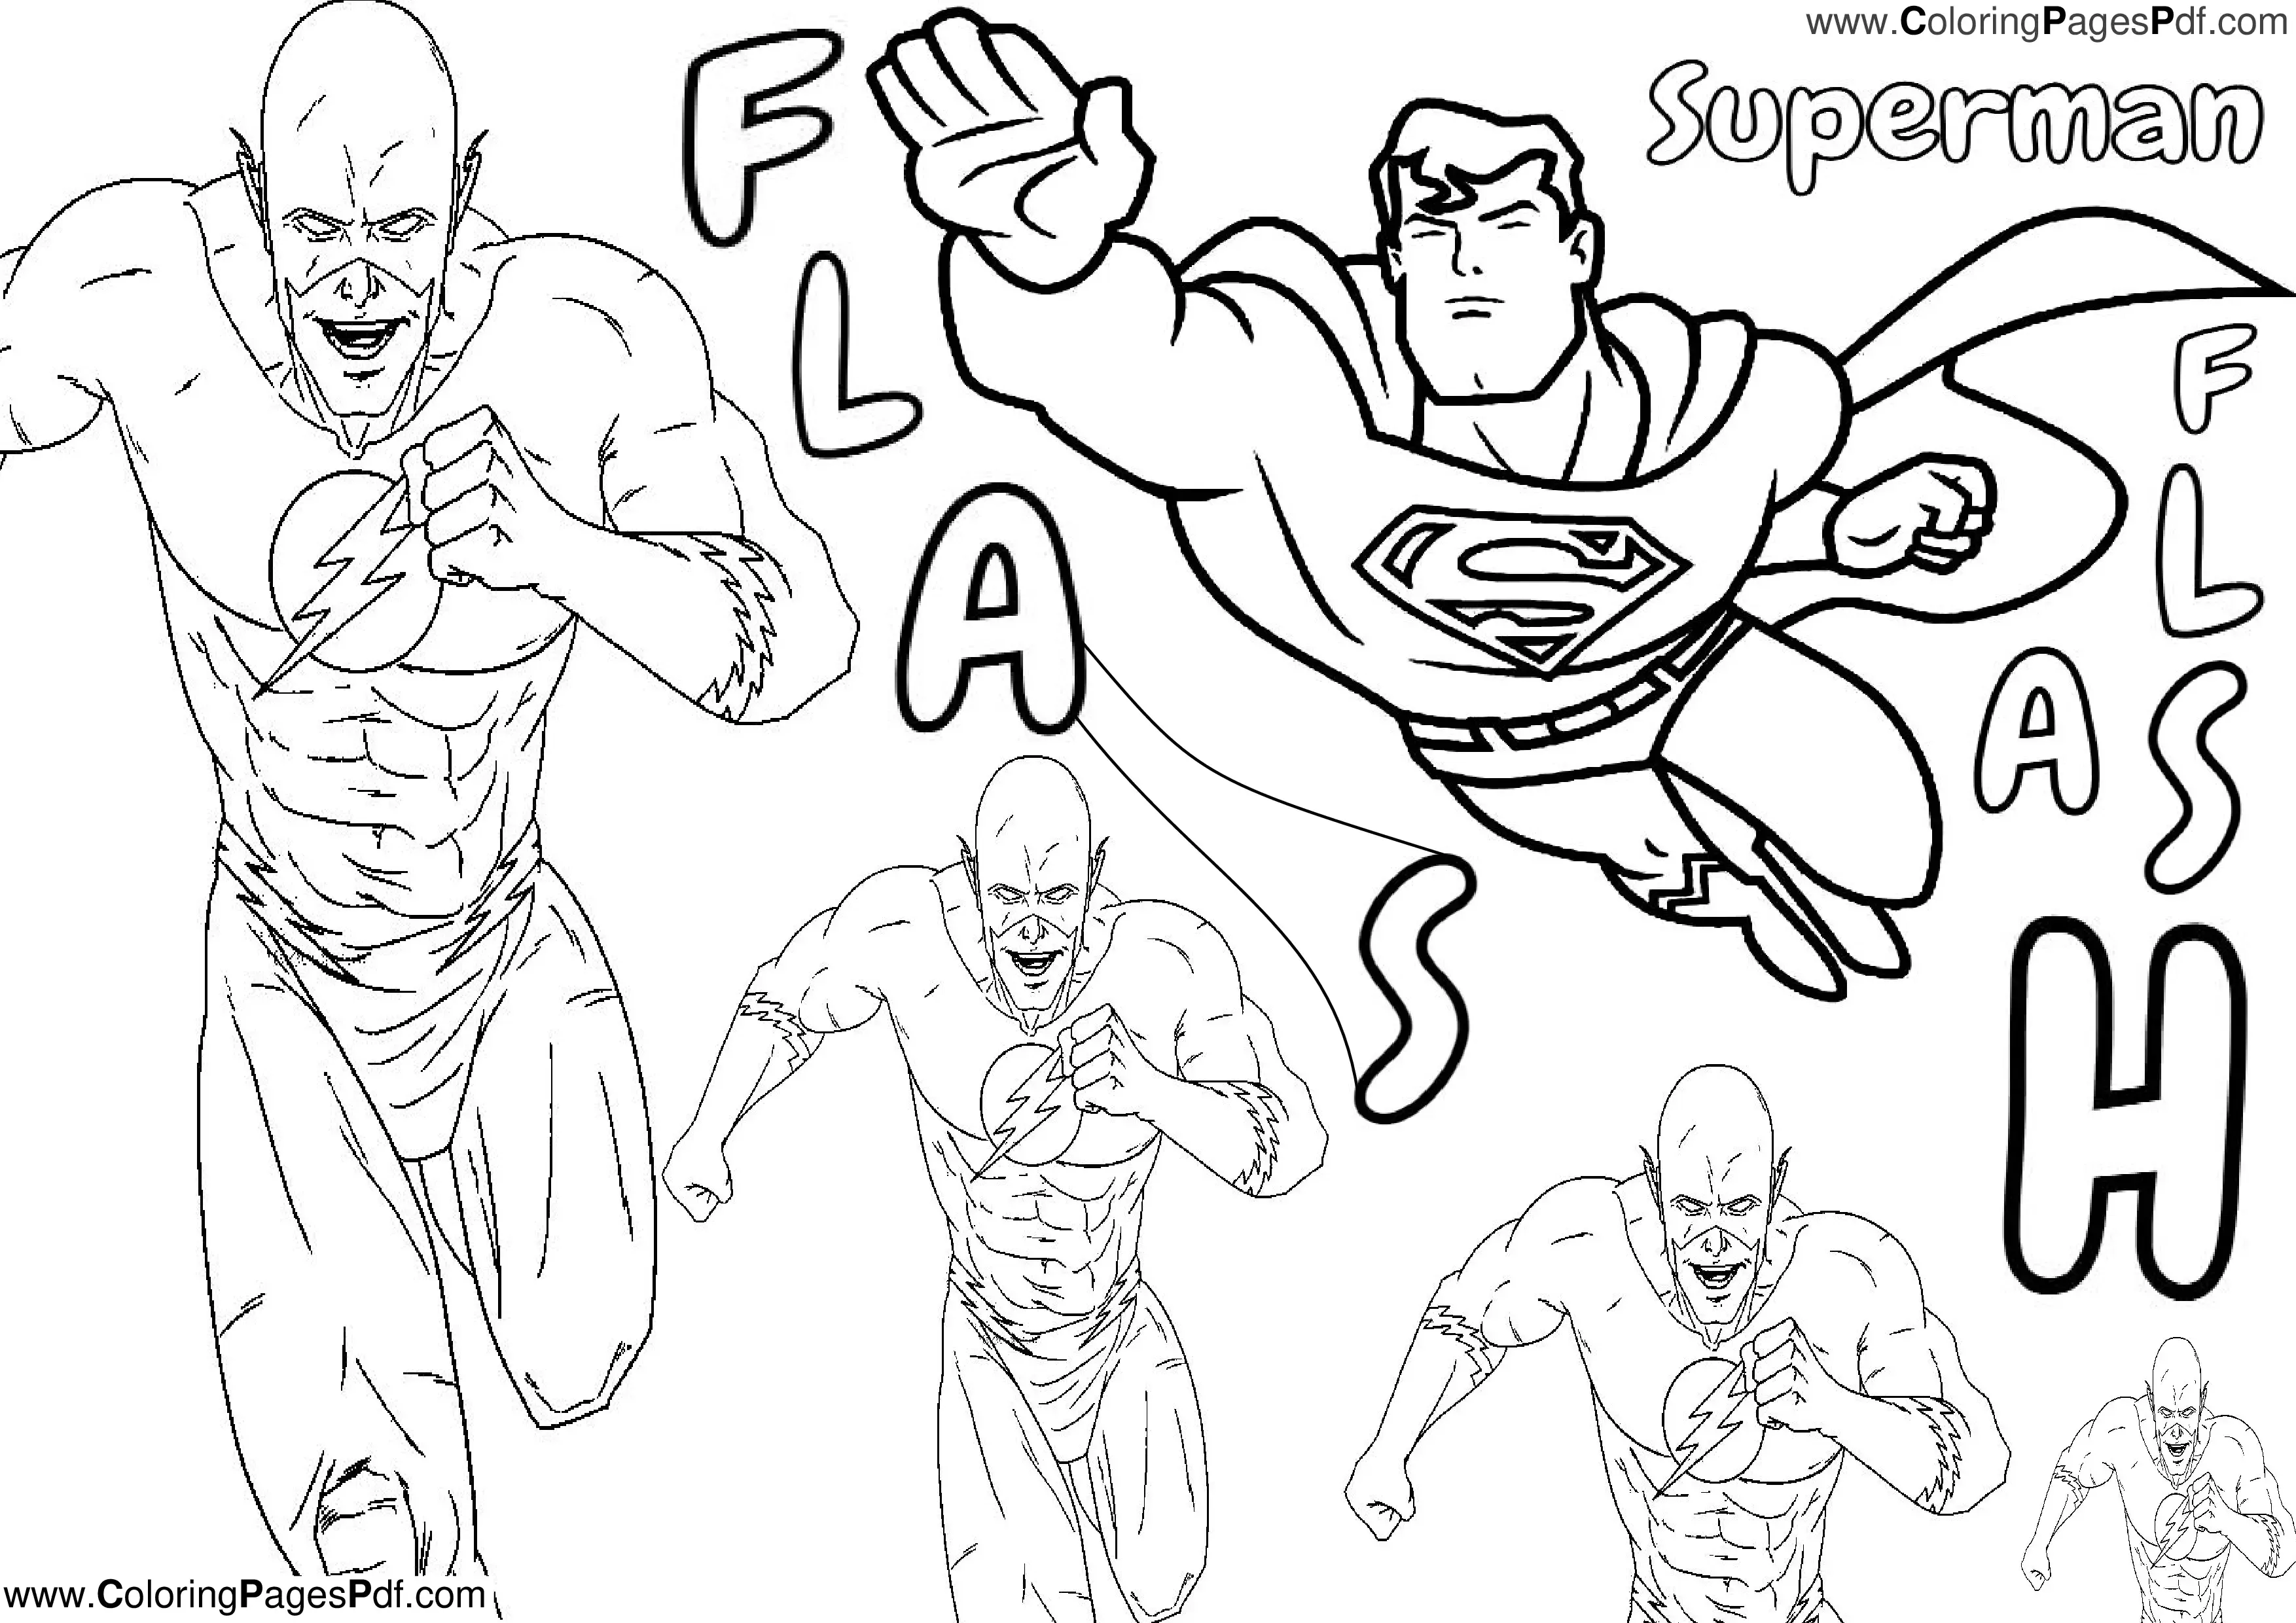 Flash & Superman coloring pages